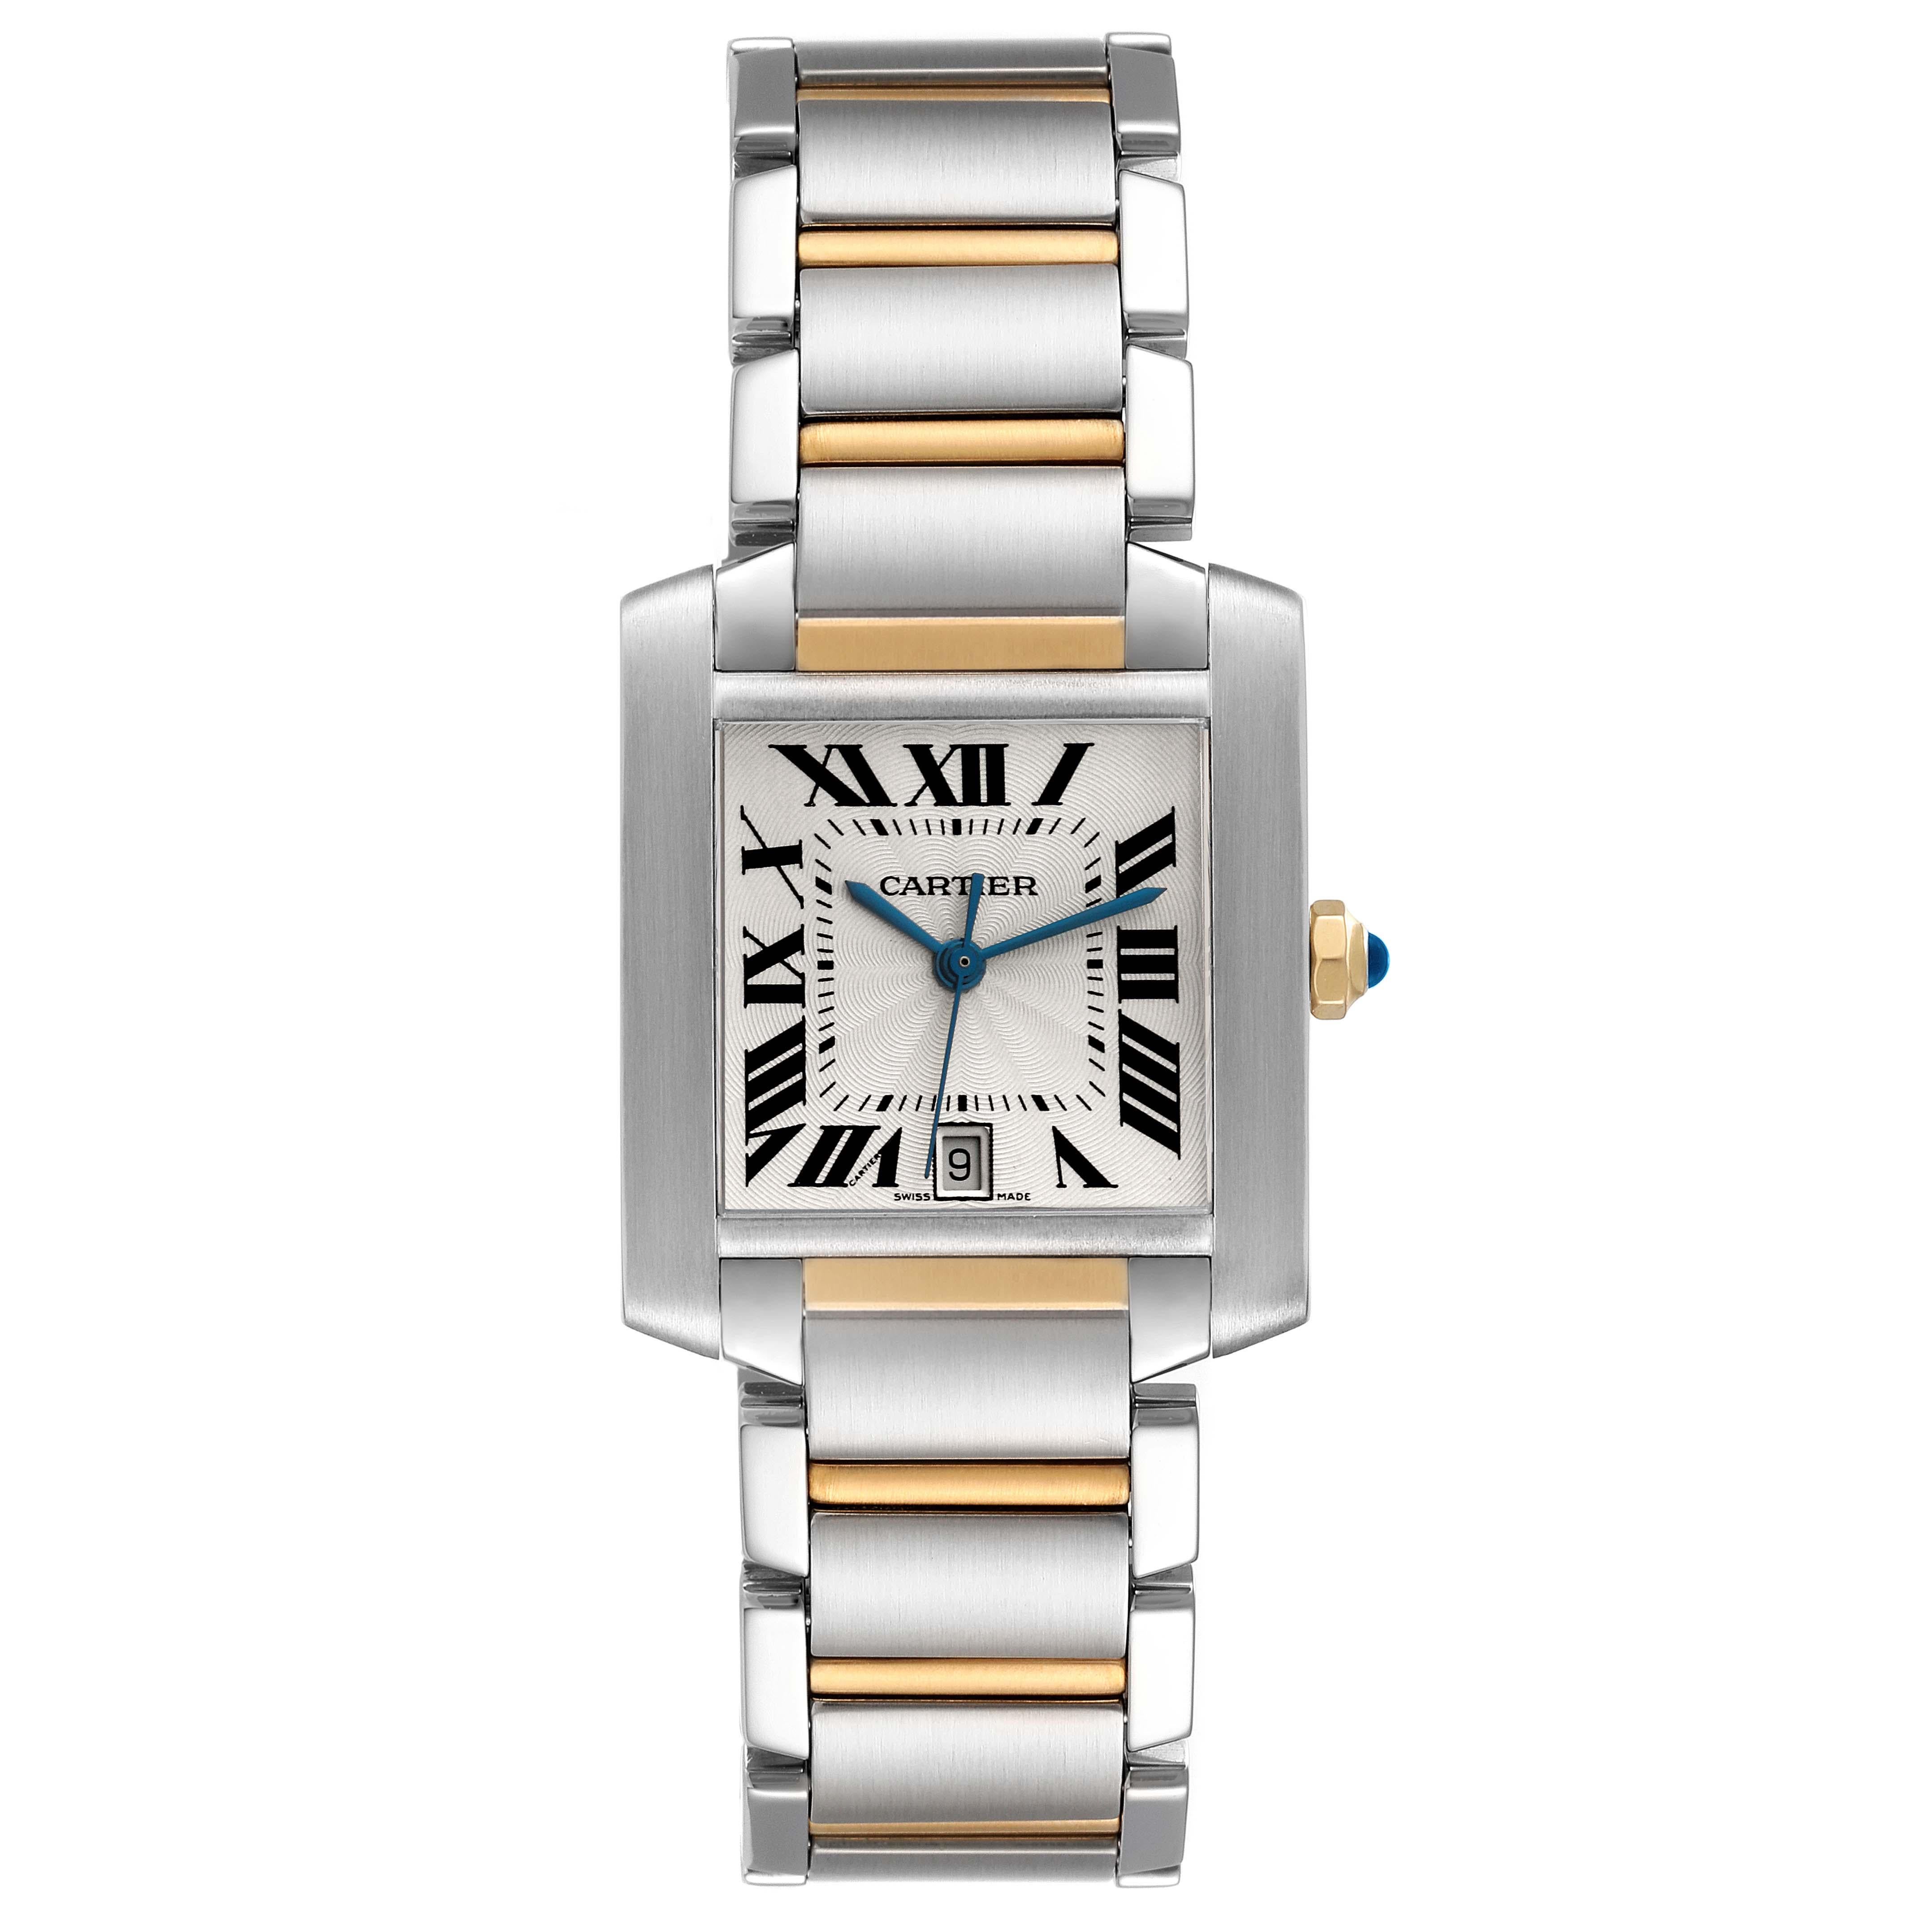 Cartier Tank Francaise Steel Yellow Gold Silver Dial Mens Watch W51005Q4. Automatic self-winding movement. Rectangular stainless steel 28.0 x 32.0 mm case. Octagonal 18K yellow gold crown set with a blue spinel cabochon. . Scratch resistant sapphire